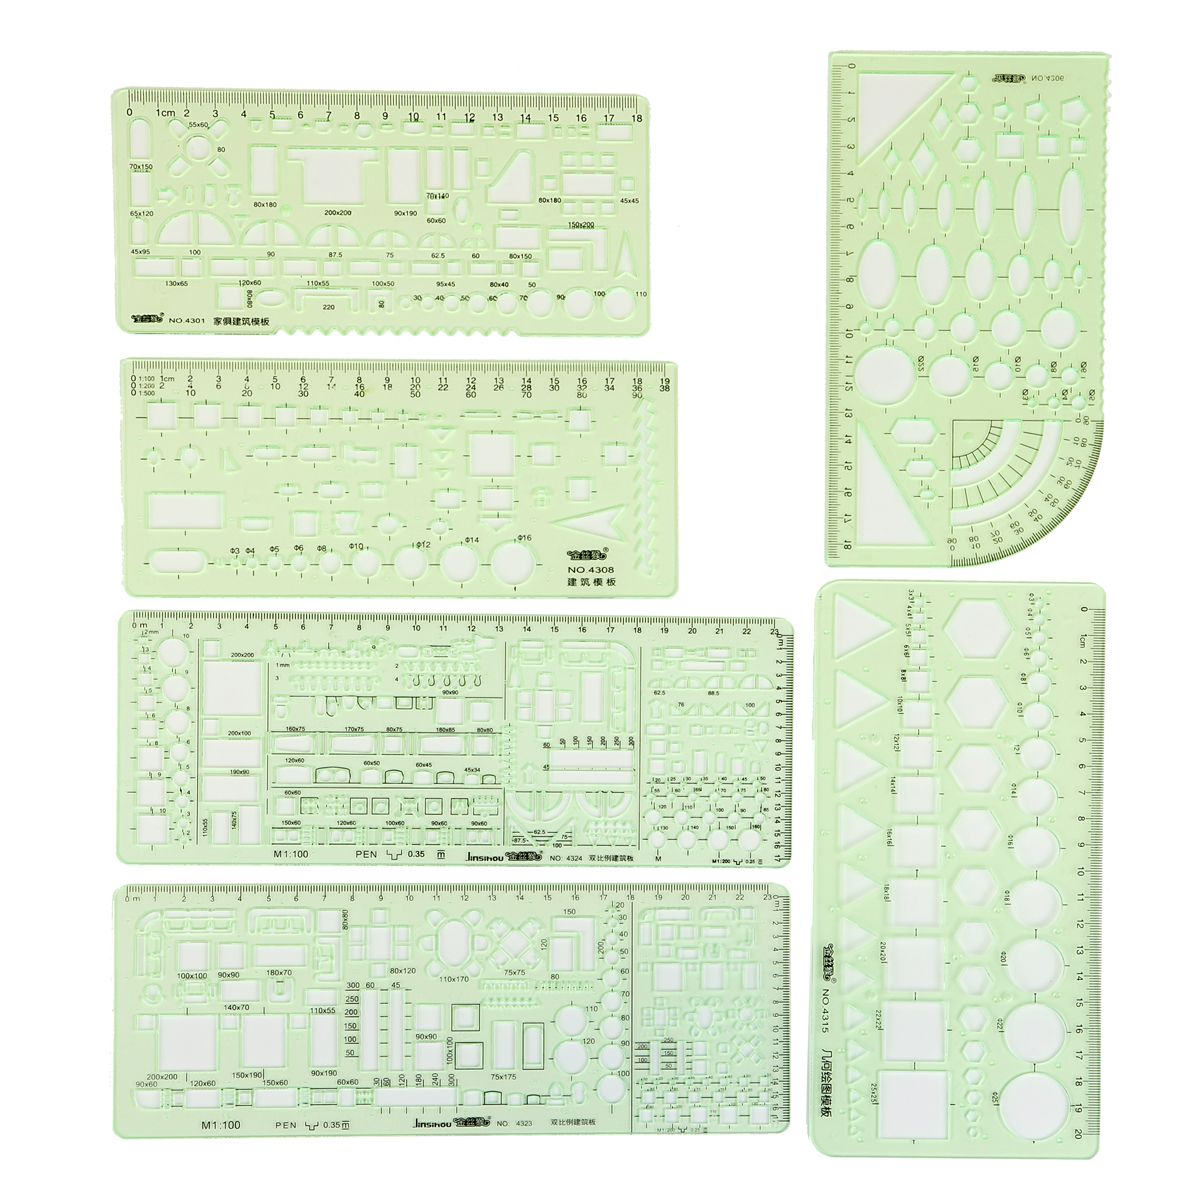 6PcsSet-Circles-Squares-Geometric-Formwork-Drawing-Templates-Angle-Ruler-Stencil-Measuring-1597534